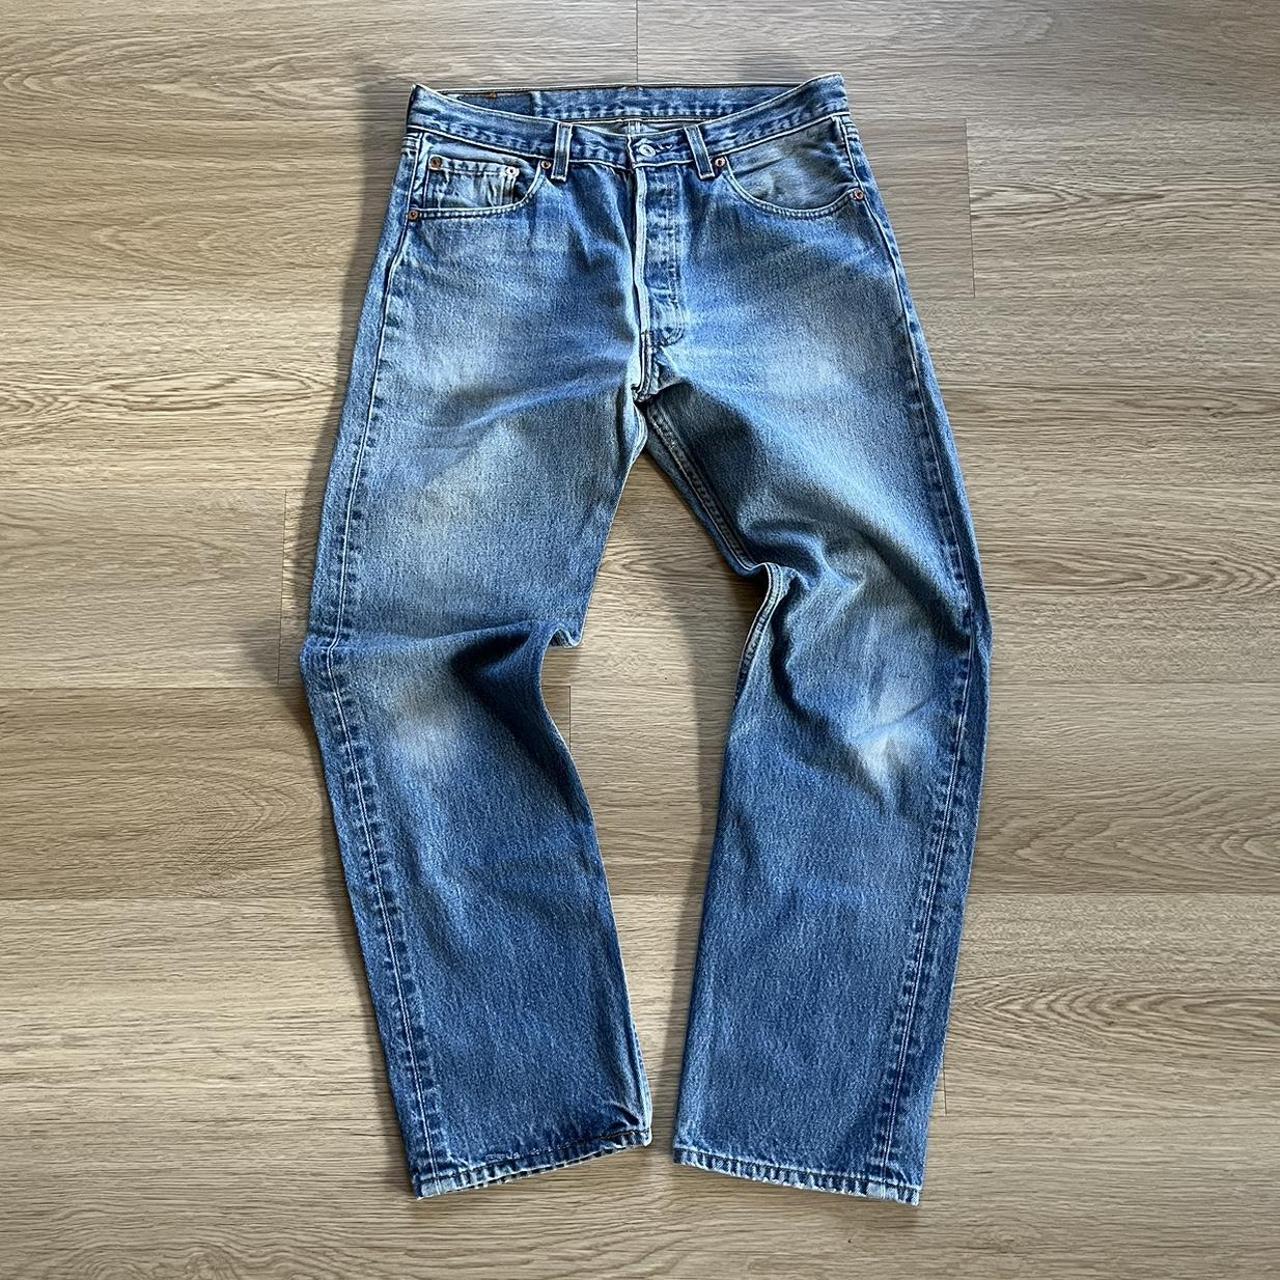 1997 501xx straight leg button fly jeans my personal... - Depop